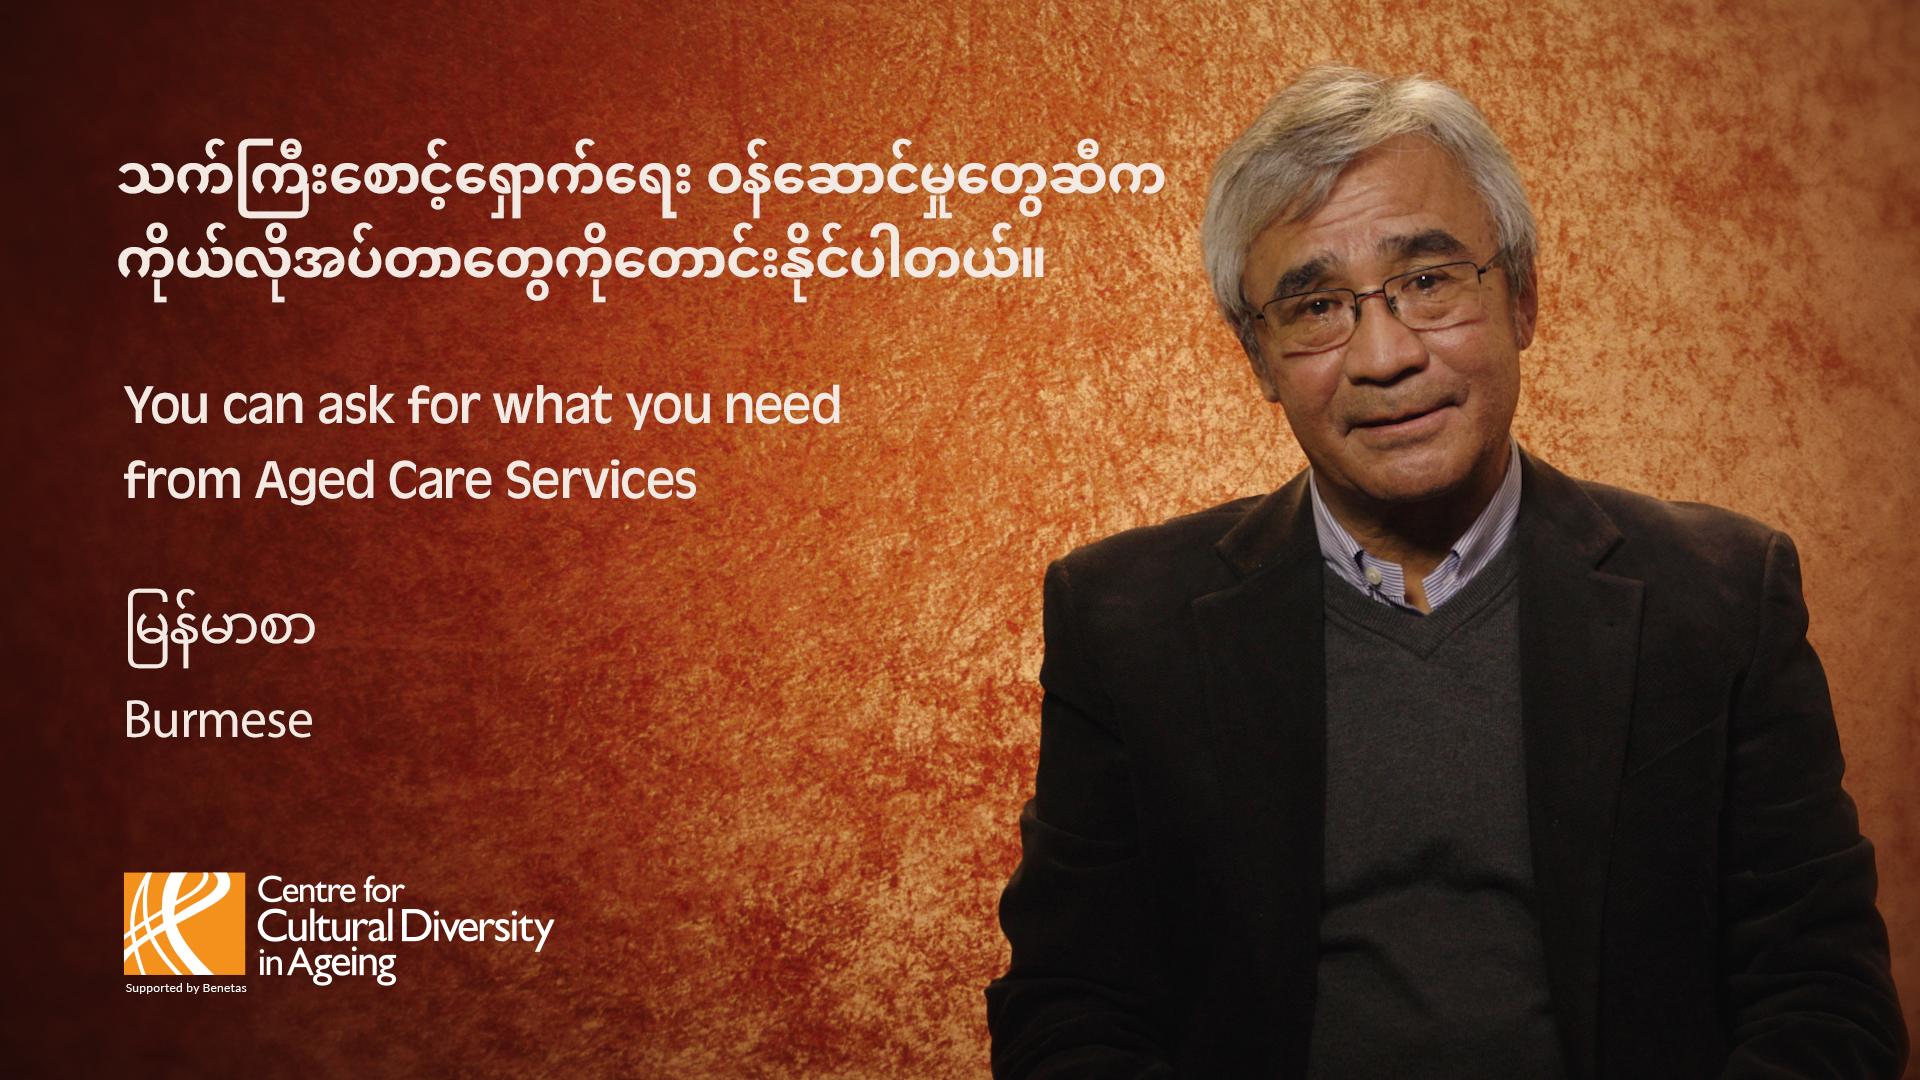 You can ask for what you need from aged care services burmese thumbnail